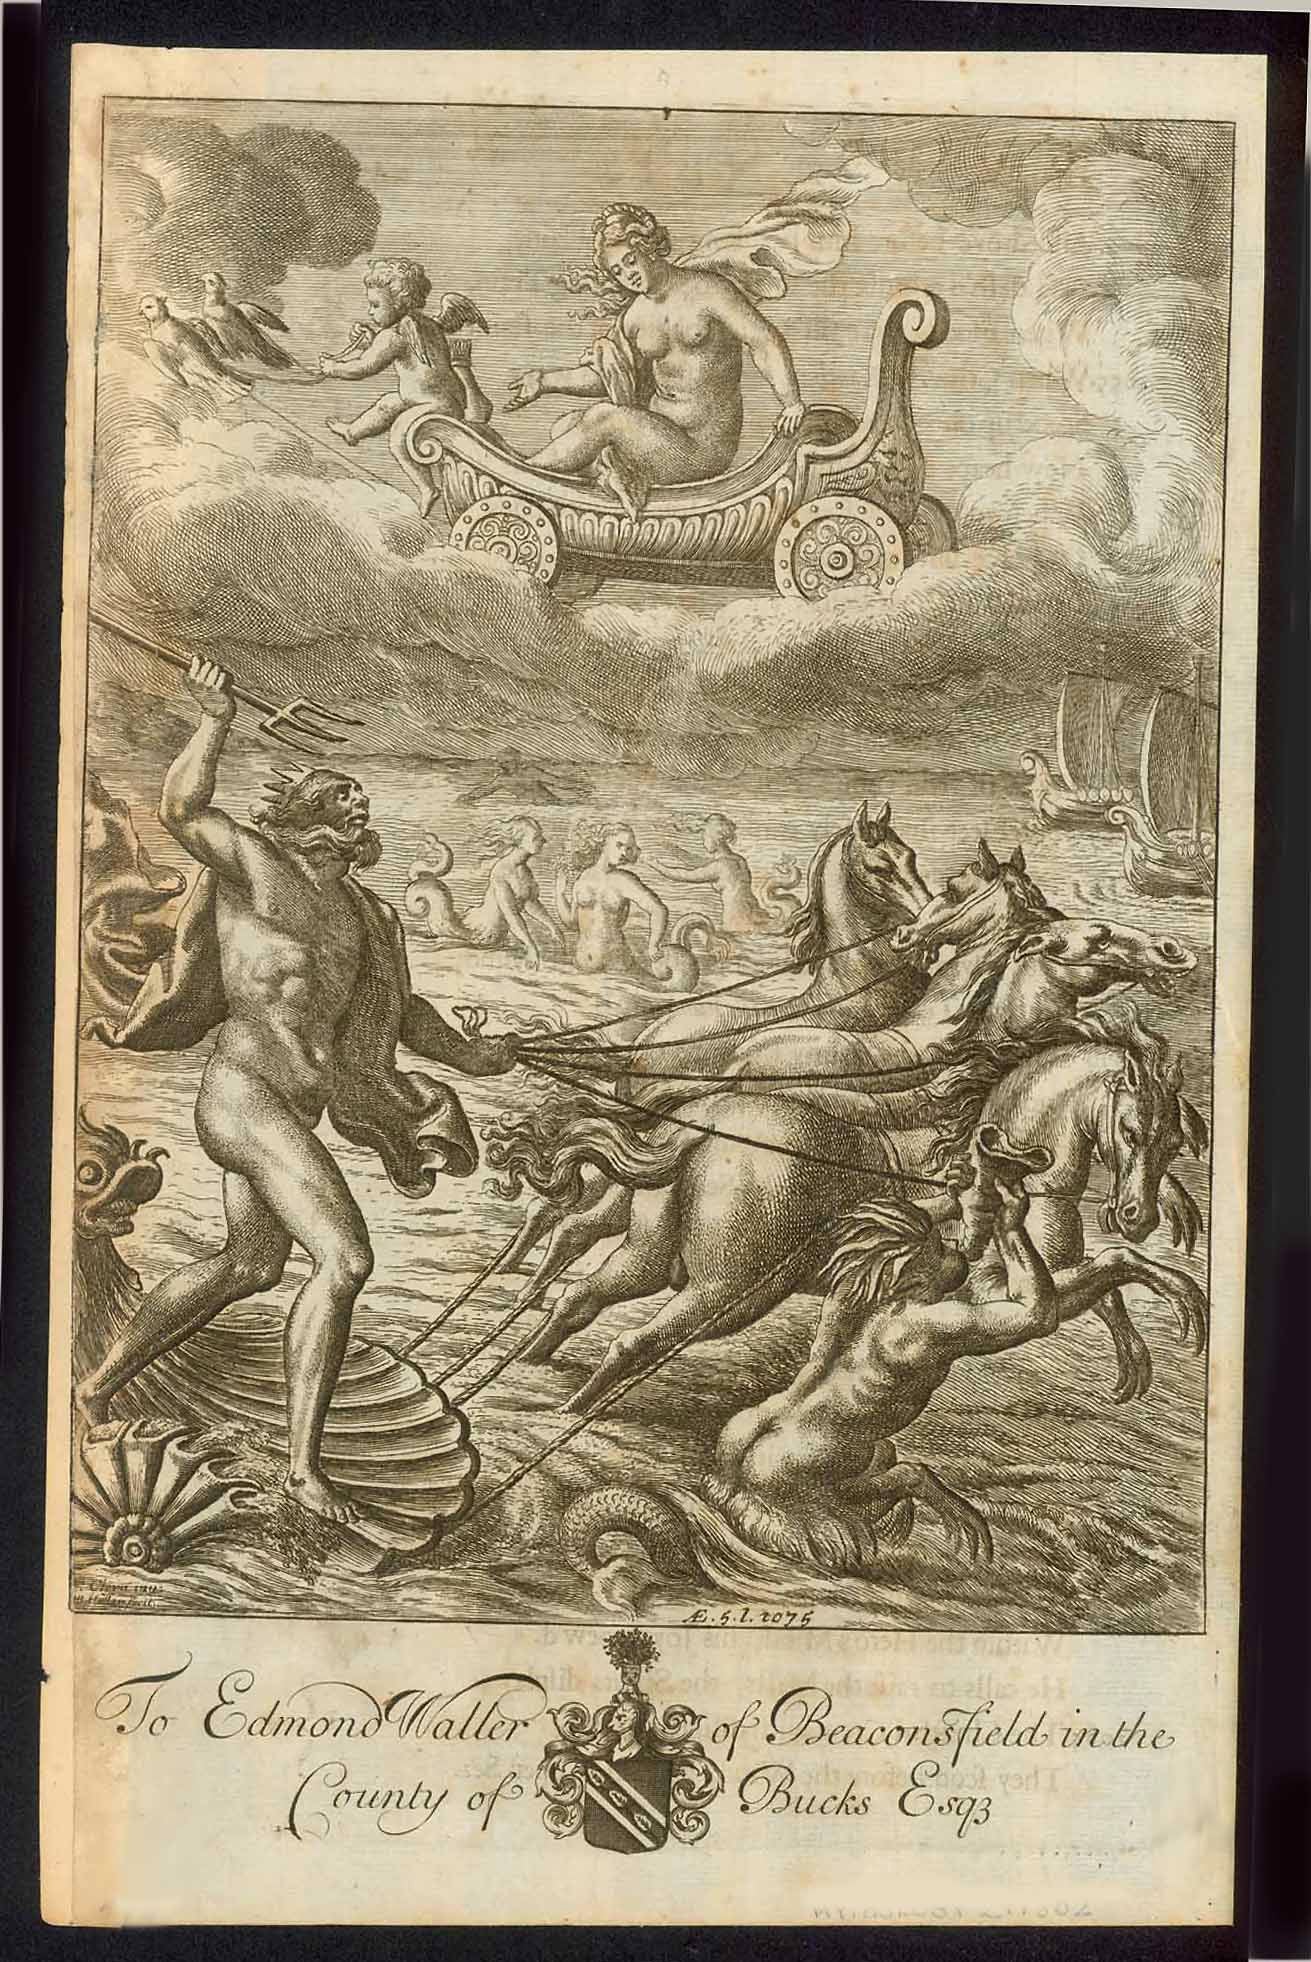  Neptune and Venus (Poseidon and Aphrodite)  Copper etching by Franz Cleyn (1582-1658)  After the drawing by Wenzel Hollar (1607-1677)  Neptune in a shell-chariot drawn by four sea horses. A triton blowing his horn. Nereids dancing in background and two sailships in distance. Venus in her chariot drawn by two doves with Cupid as coachman  Original state, London, 1654.  This, with the dedication to Edmond Waller of Beaconfield in the County of Bucks, is state III.  Published in London, 1658  Original antique